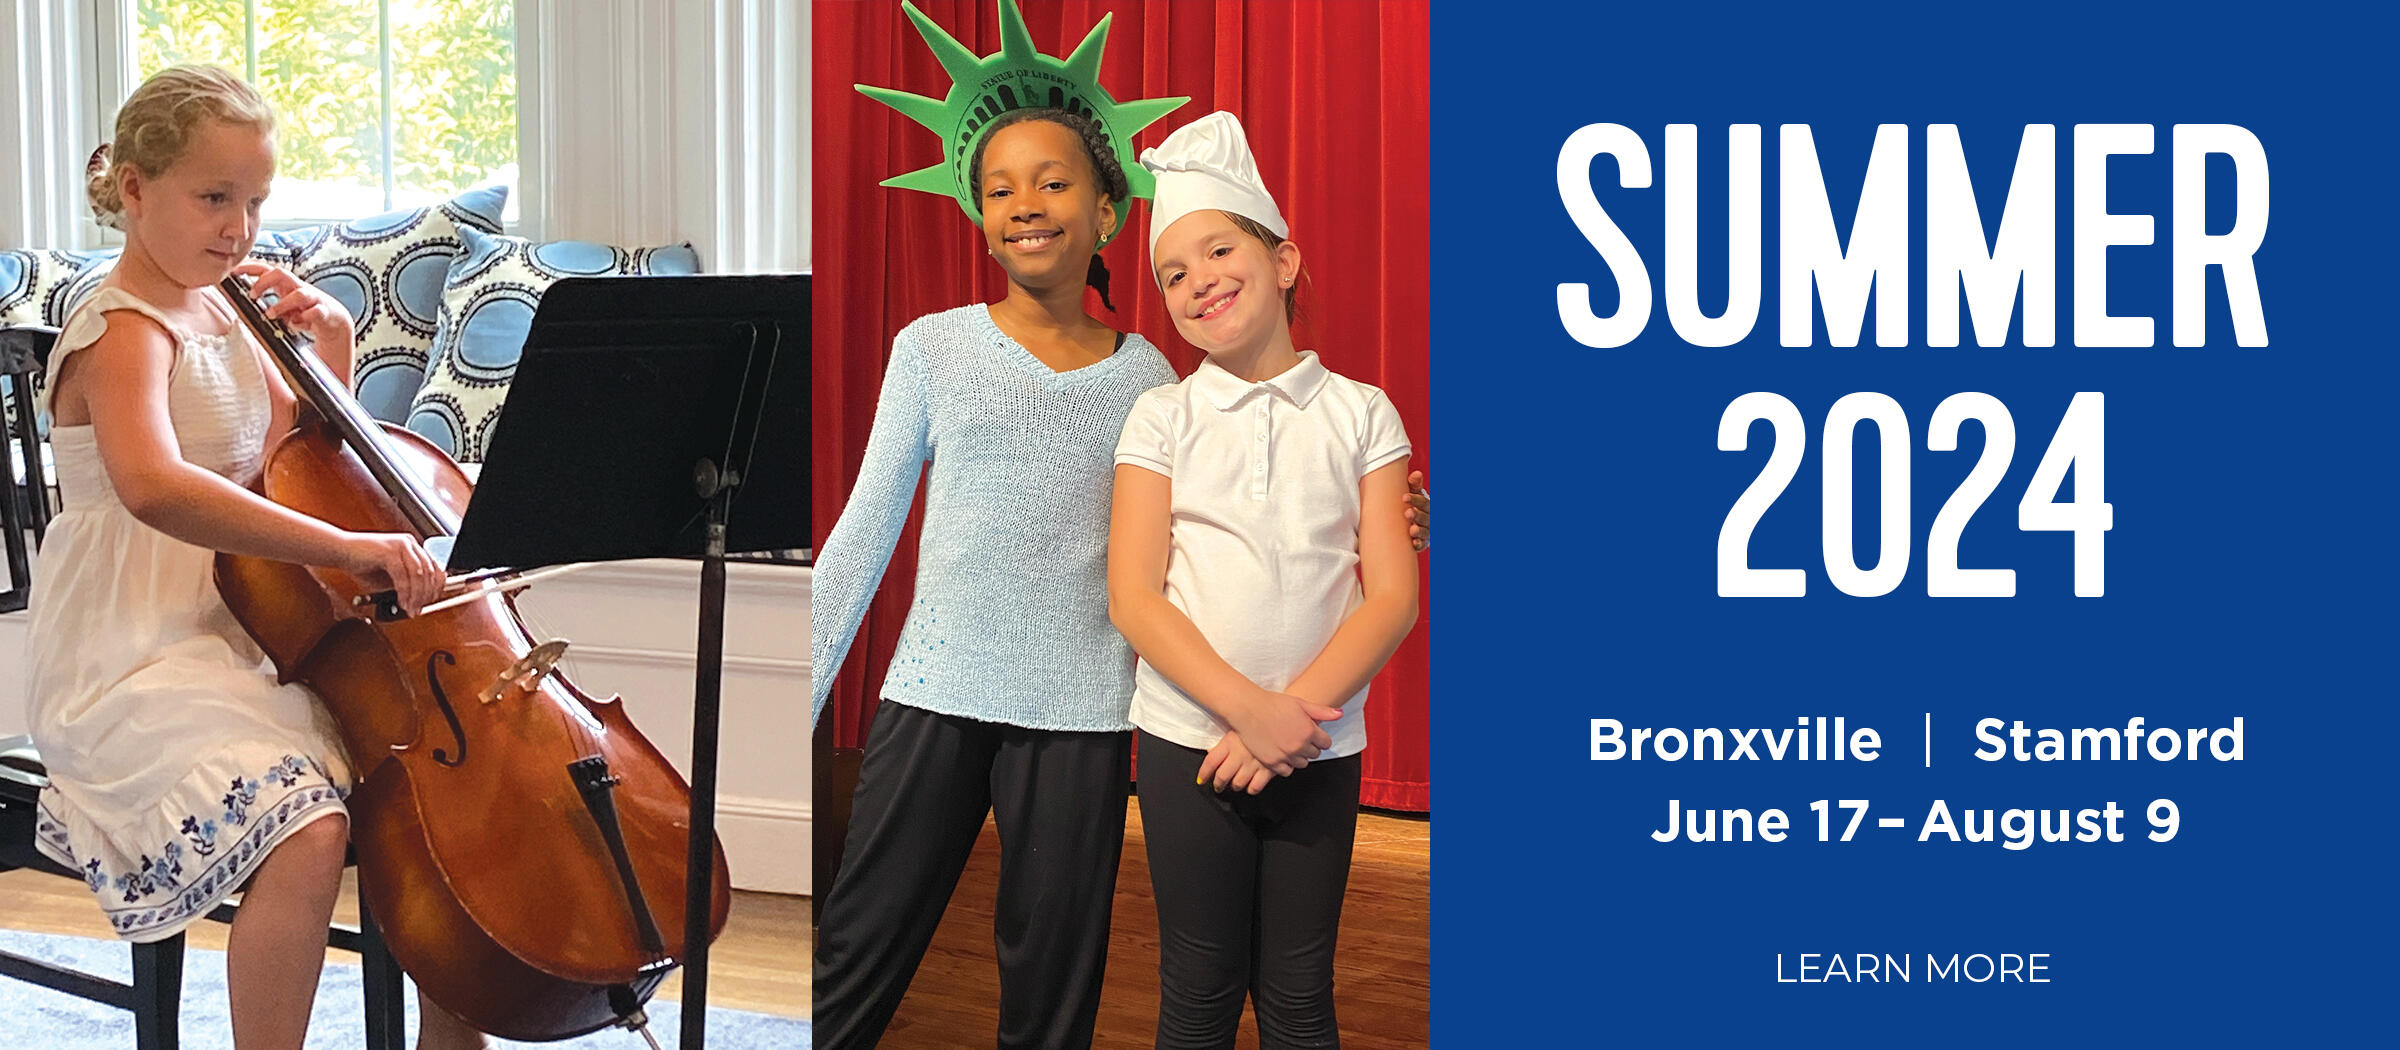 Summer music programs at concordia conservatory